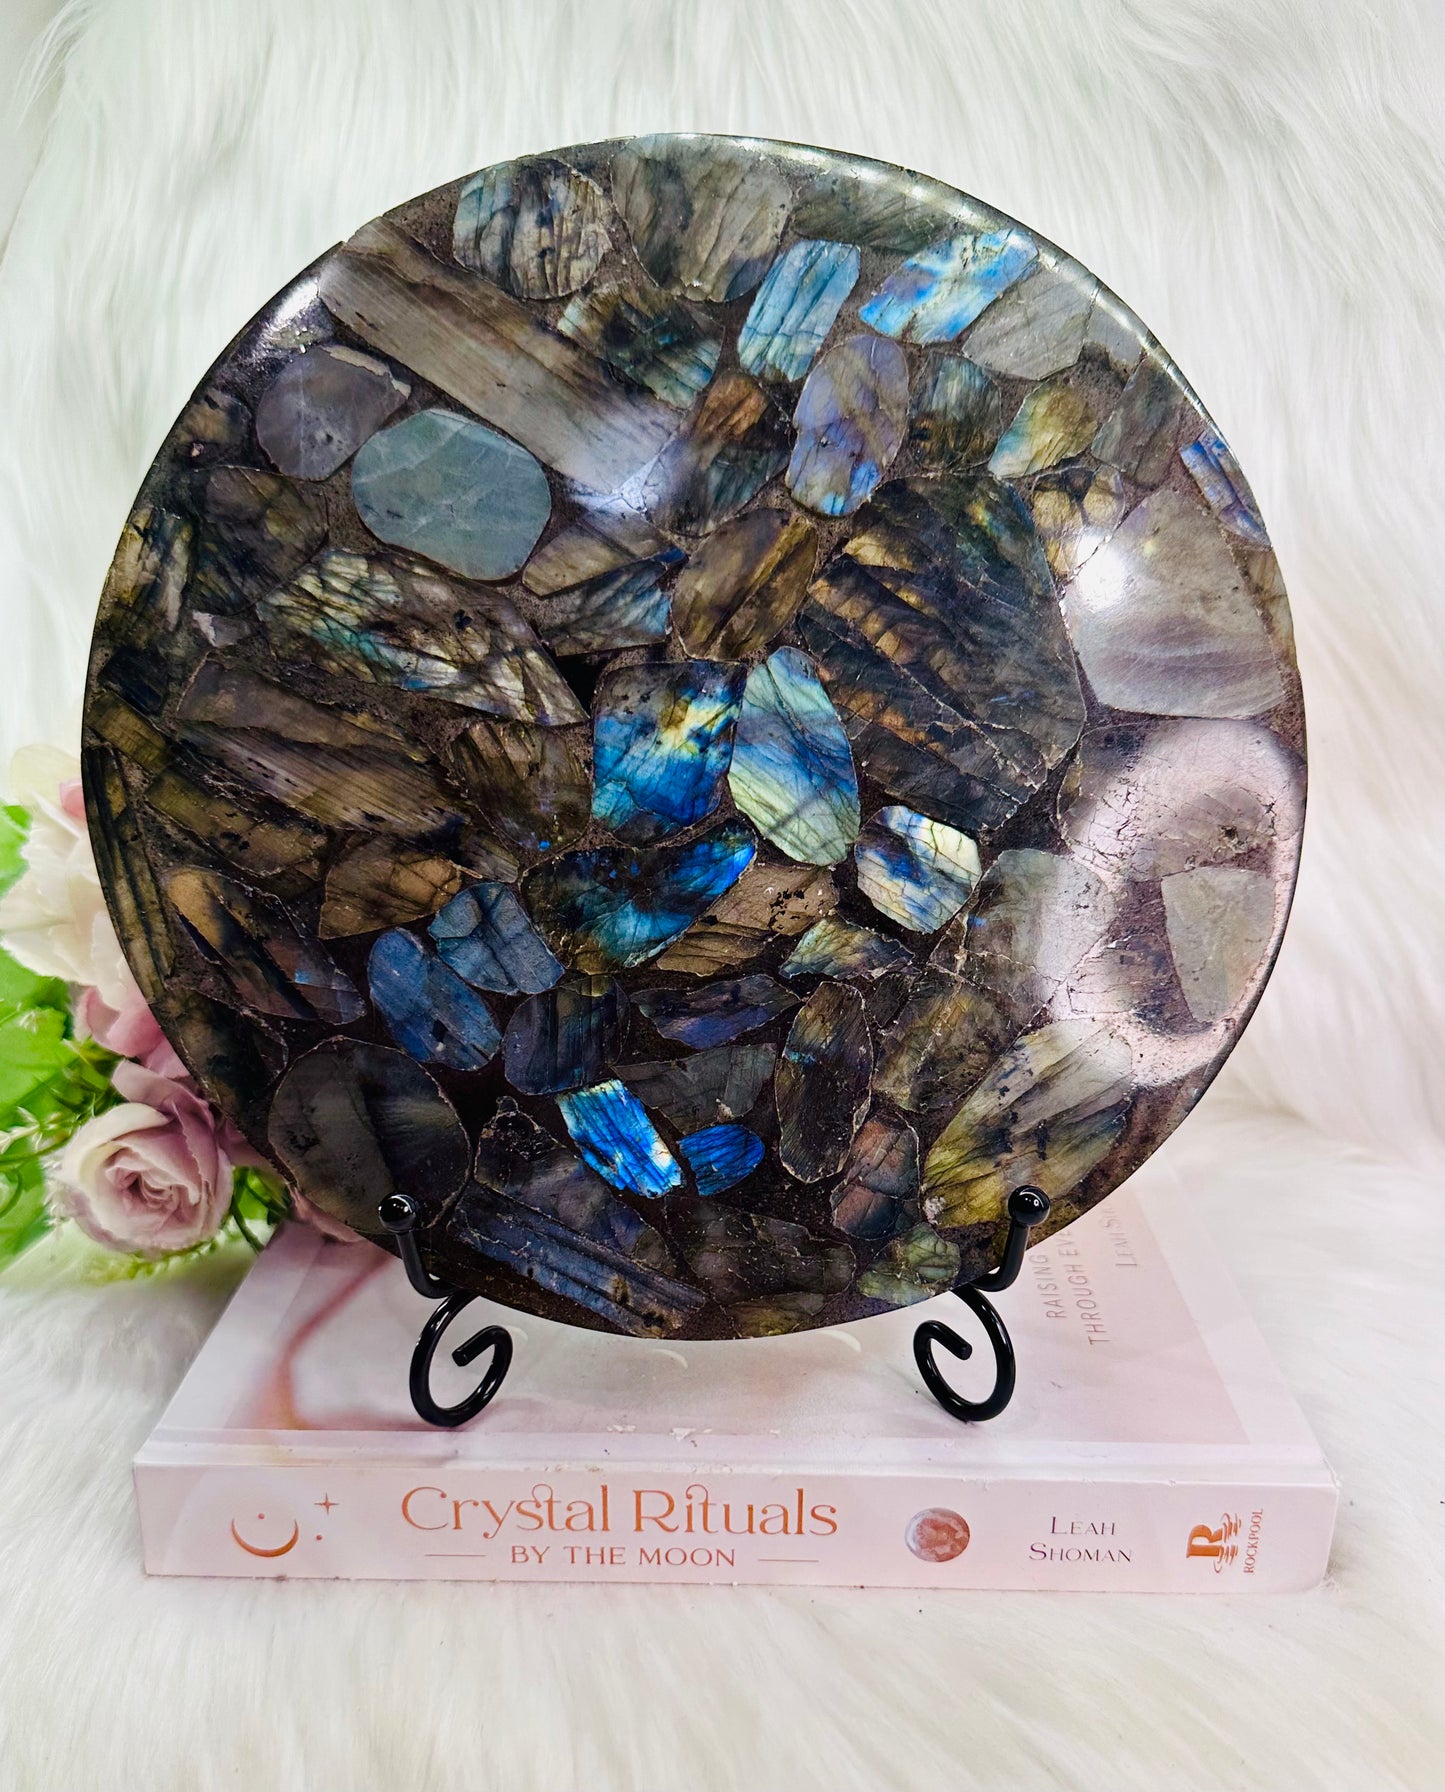 ⚜️ SALE ⚜️Incredible Large 22cm Labradorite Plate Full Of Flash On Stand